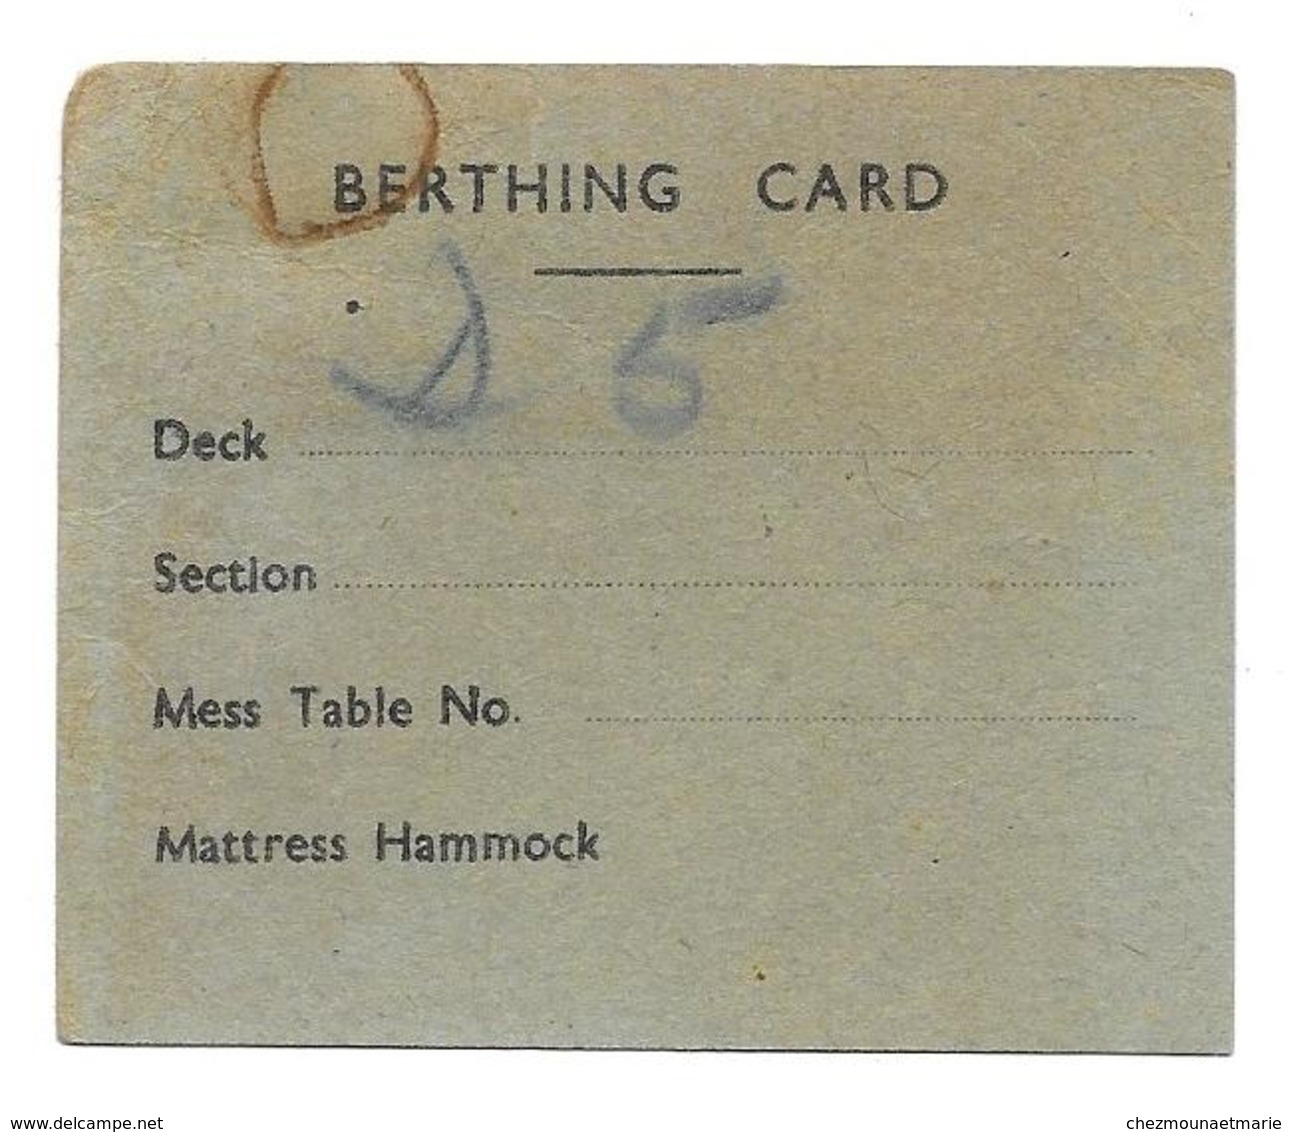 BERTHING CARD - N°5 BOAT DECK AFT N°3 HATCH - FIRE STATION BOAT SATATION - MILITAIRE - Barcos